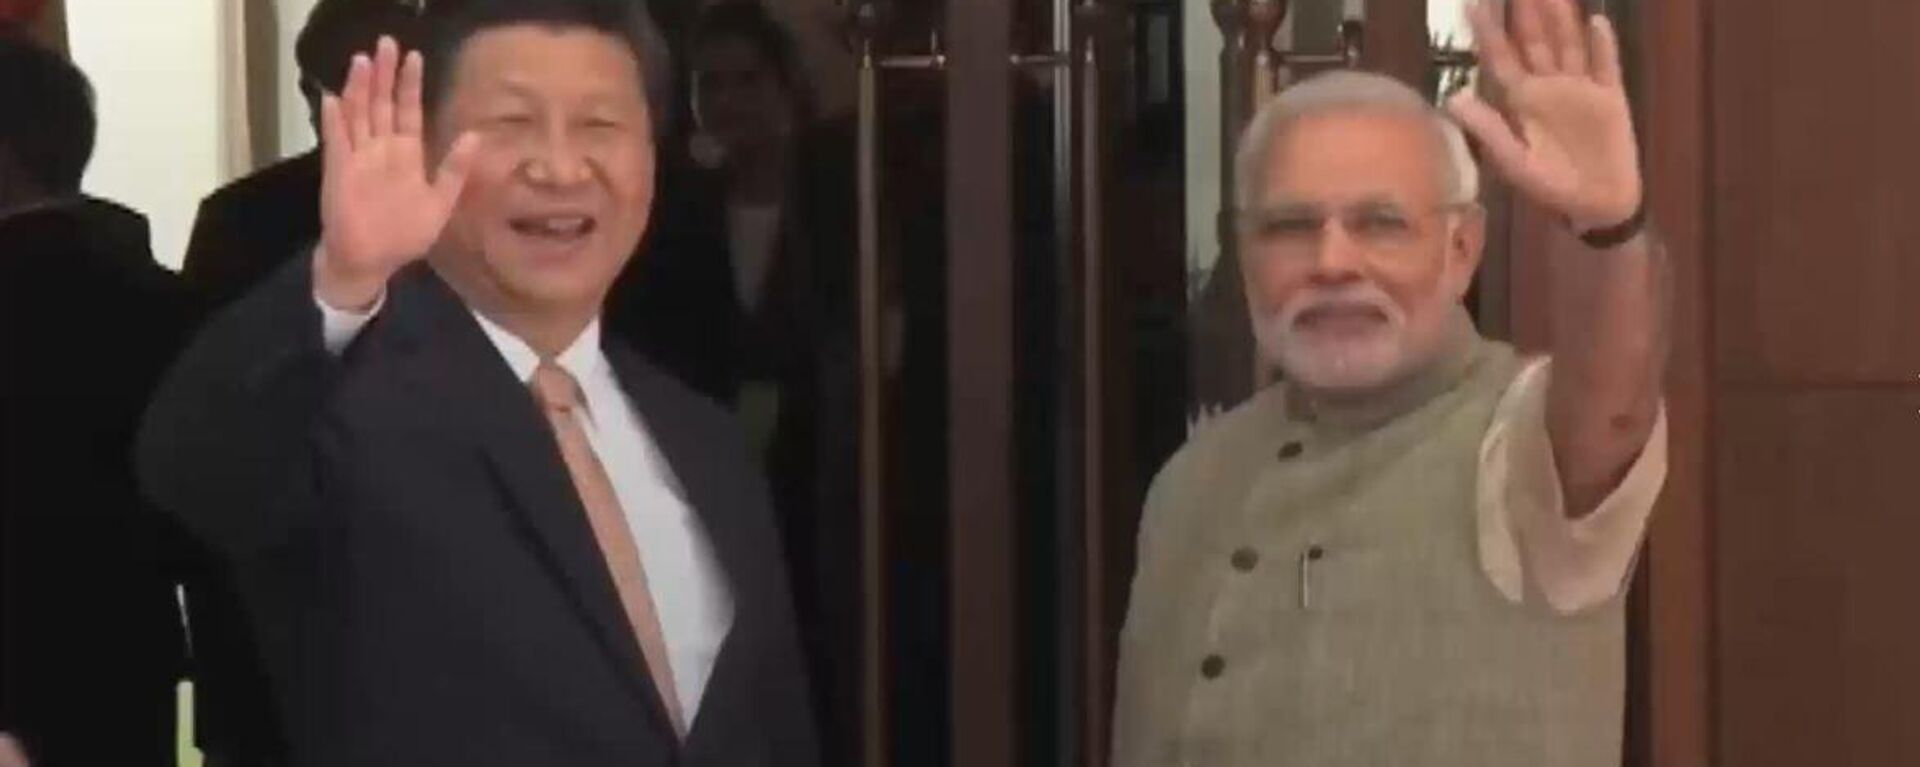 India and China Hold 18th Round of Talks to Ease Border Tensions - Sputnik India, 1920, 24.04.2023